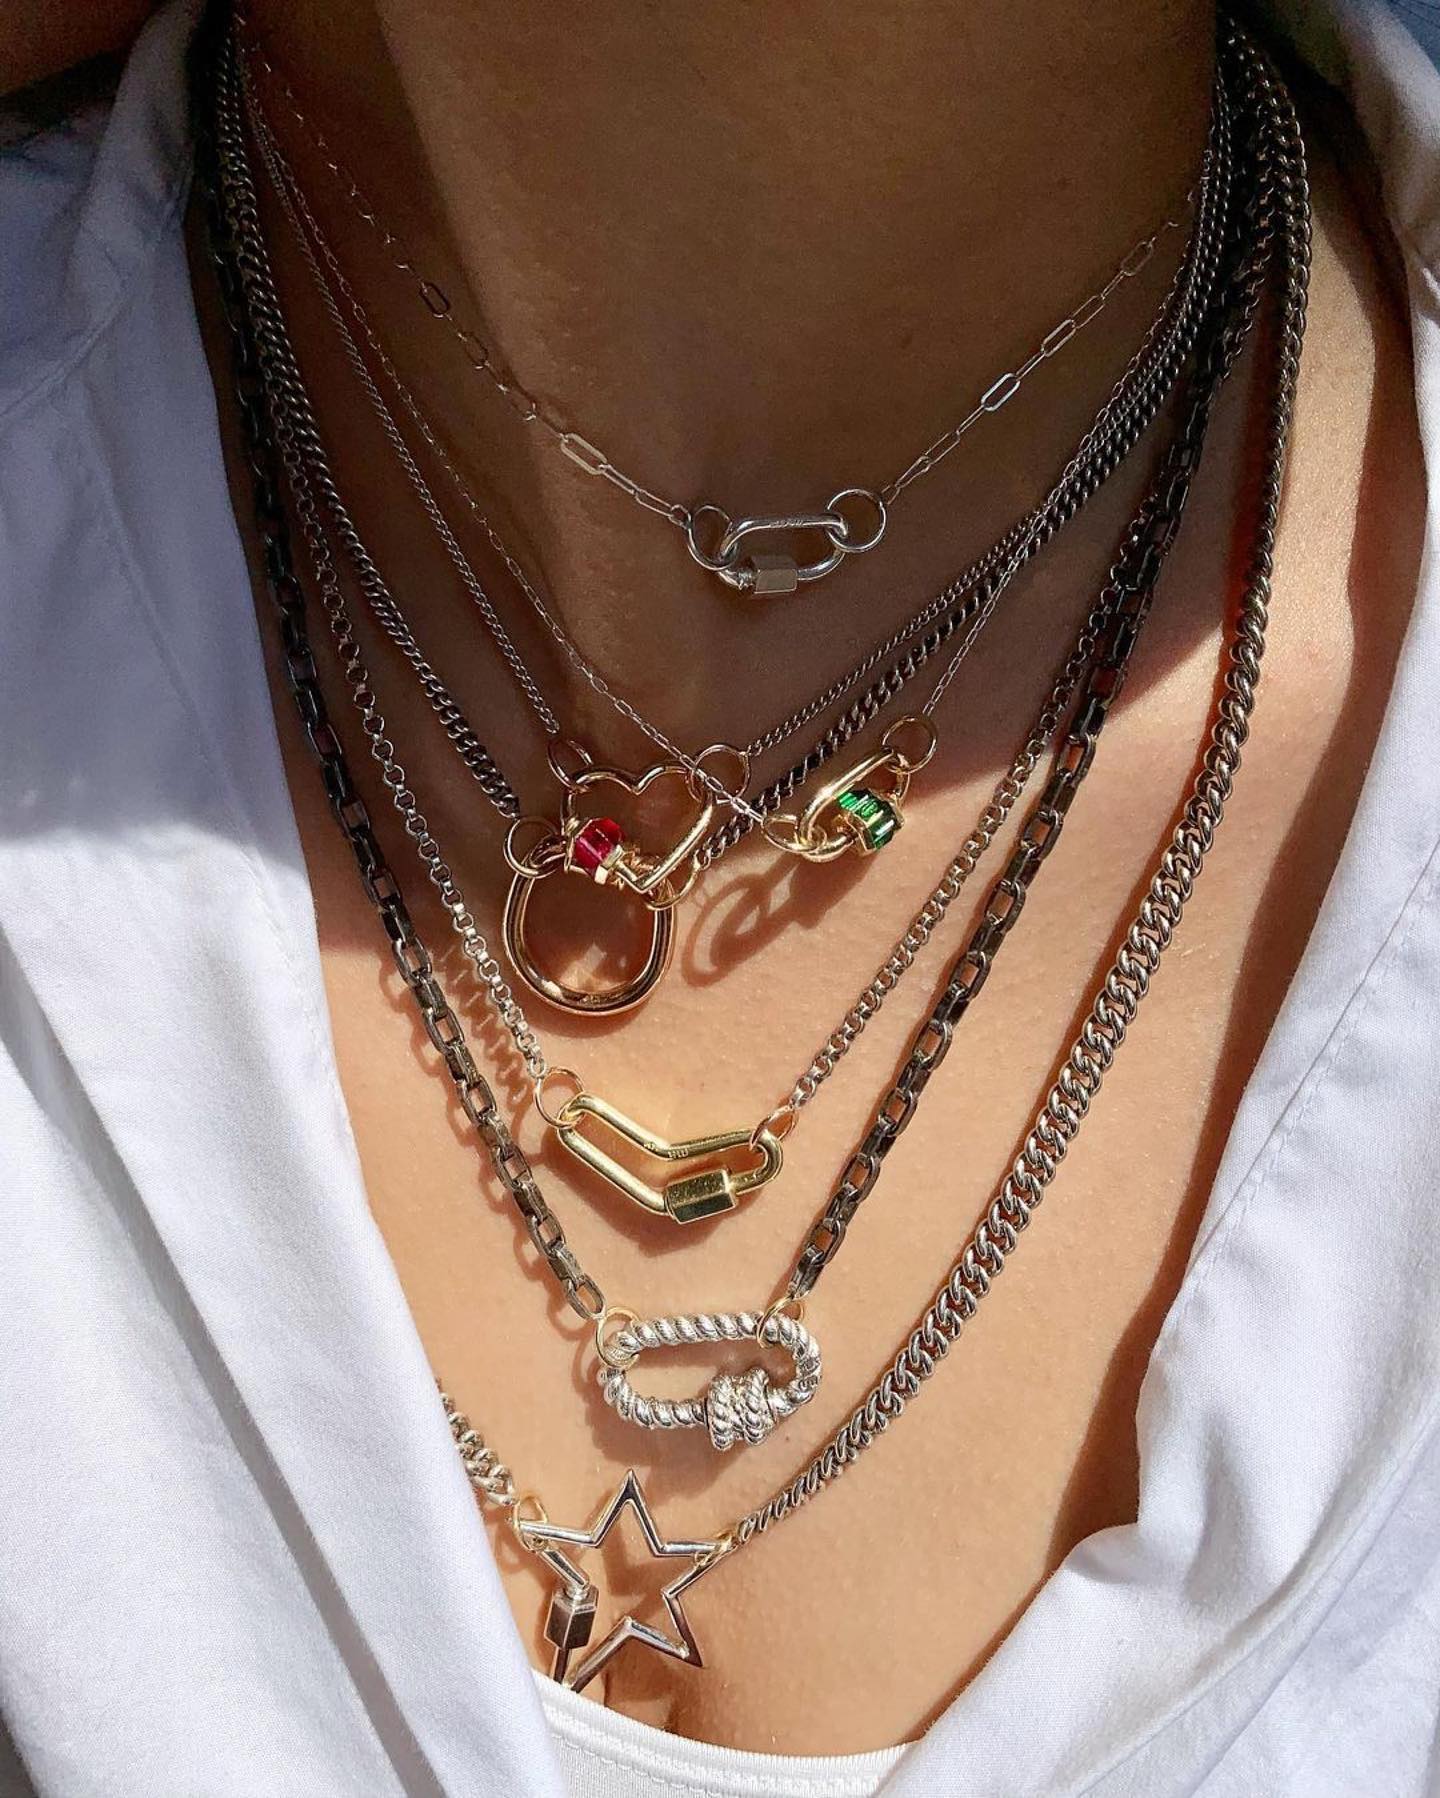 Close up of woman's decolletage wearing many necklaces including silver rolo chain